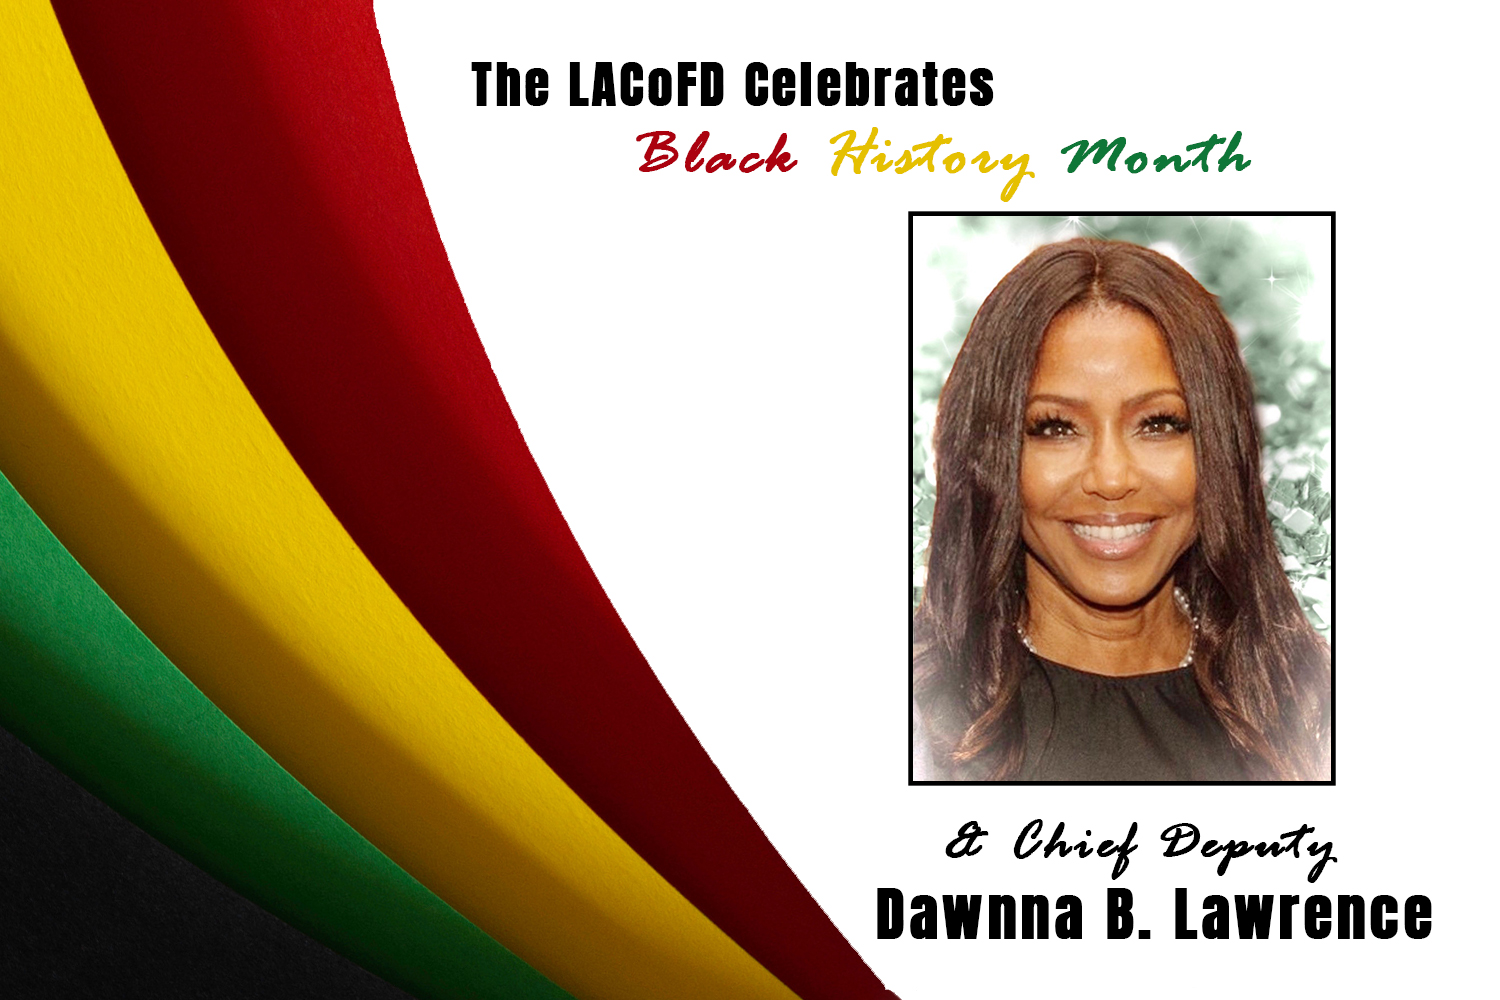 As Black History Month draws to a close, the Los Angeles County Fire Department (LACoFD) wishes to recognize one of its team members who has greatly contributed to the success of our organization: Chief Deputy Dawnna B. Lawrence.